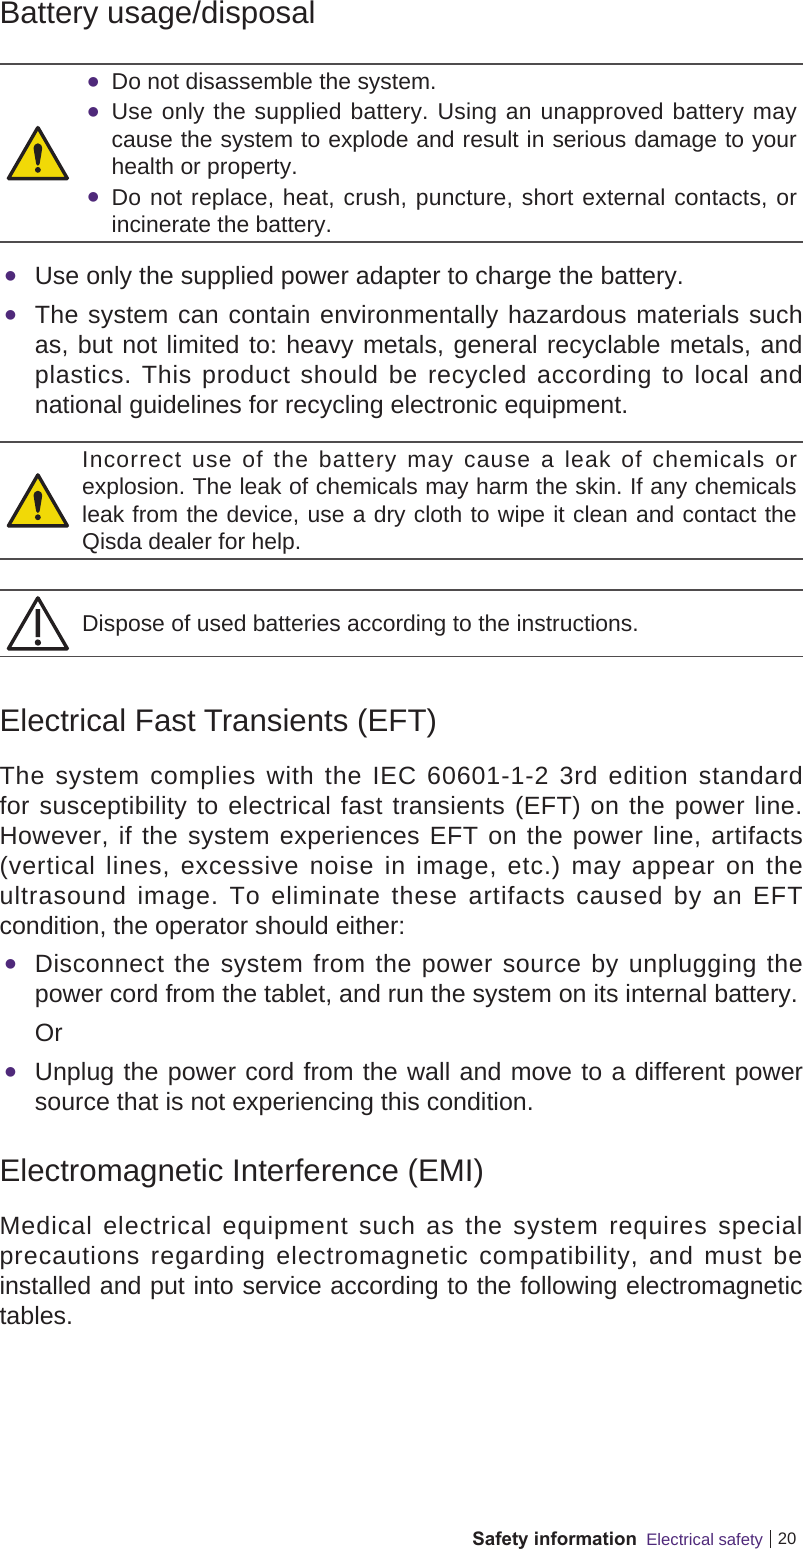 20Safety information  Electrical safetyBattery usage/disposal Do not disassemble the system. Use only the supplied battery. Using an unapproved battery may cause the system to explode and result in serious damage to your health or property. Do not replace, heat, crush, puncture, short external contacts, or incinerate the battery. Use only the supplied power adapter to charge the battery. The system can contain environmentally hazardous materials such as, but not limited to: heavy metals, general recyclable metals, and plastics. This product should be recycled according to local and national guidelines for recycling electronic equipment.Incorrect use of the battery may cause a leak of chemicals or explosion. The leak of chemicals may harm the skin. If any chemicals leak from the device, use a dry cloth to wipe it clean and contact the Qisda dealer for help.Dispose of used batteries according to the instructions.Electrical Fast Transients (EFT)The system complies with the IEC 60601-1-2 3rd edition standard for susceptibility to electrical fast transients (EFT) on the power line. However, if the system experiences EFT on the power line, artifacts (vertical lines, excessive noise in image, etc.) may appear on the ultrasound image. To eliminate these artifacts caused by an EFT condition, the operator should either: Disconnect the system from the power source by unplugging the power cord from the tablet, and run the system on its internal battery.Or Unplug the power cord from the wall and move to a different power source that is not experiencing this condition.Electromagnetic Interference (EMI)Medical electrical equipment such as the system requires special precautions regarding electromagnetic compatibility, and must be installed and put into service according to the following electromagnetic tables.